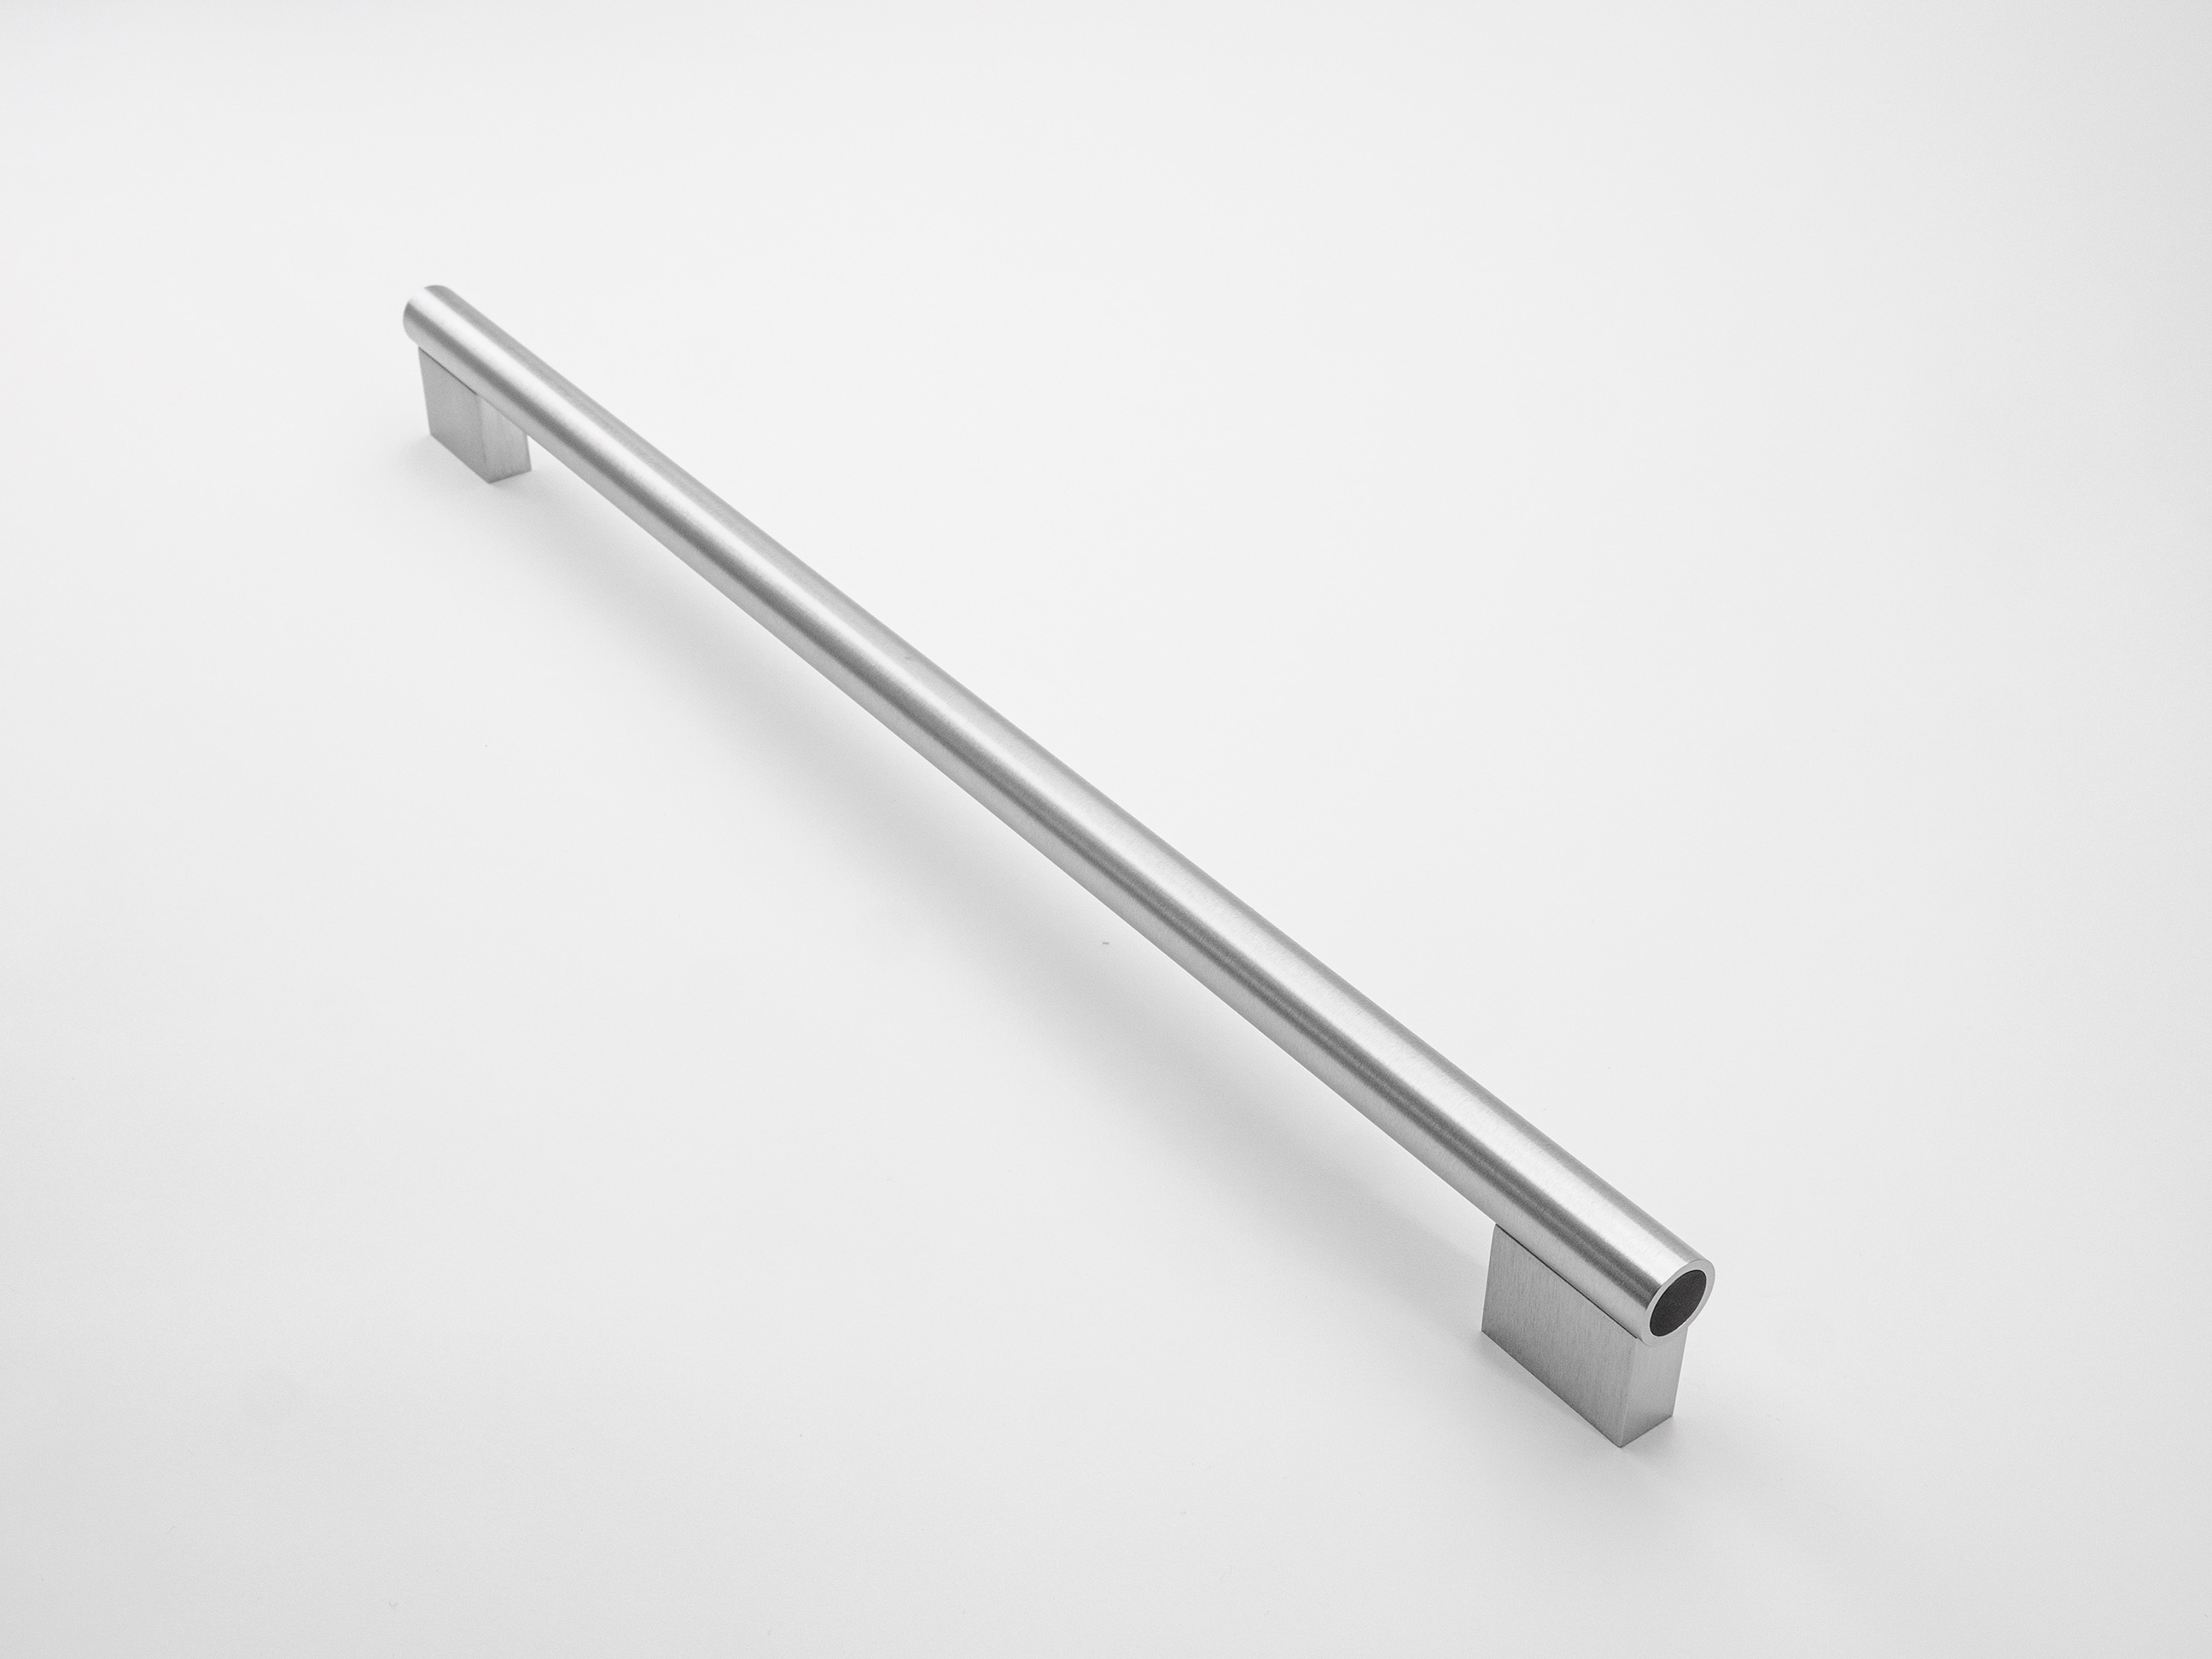 5-piece tubular handle from extruded aluminium - with 2 derlin caps with brushed and Anodized stainless steel spacers